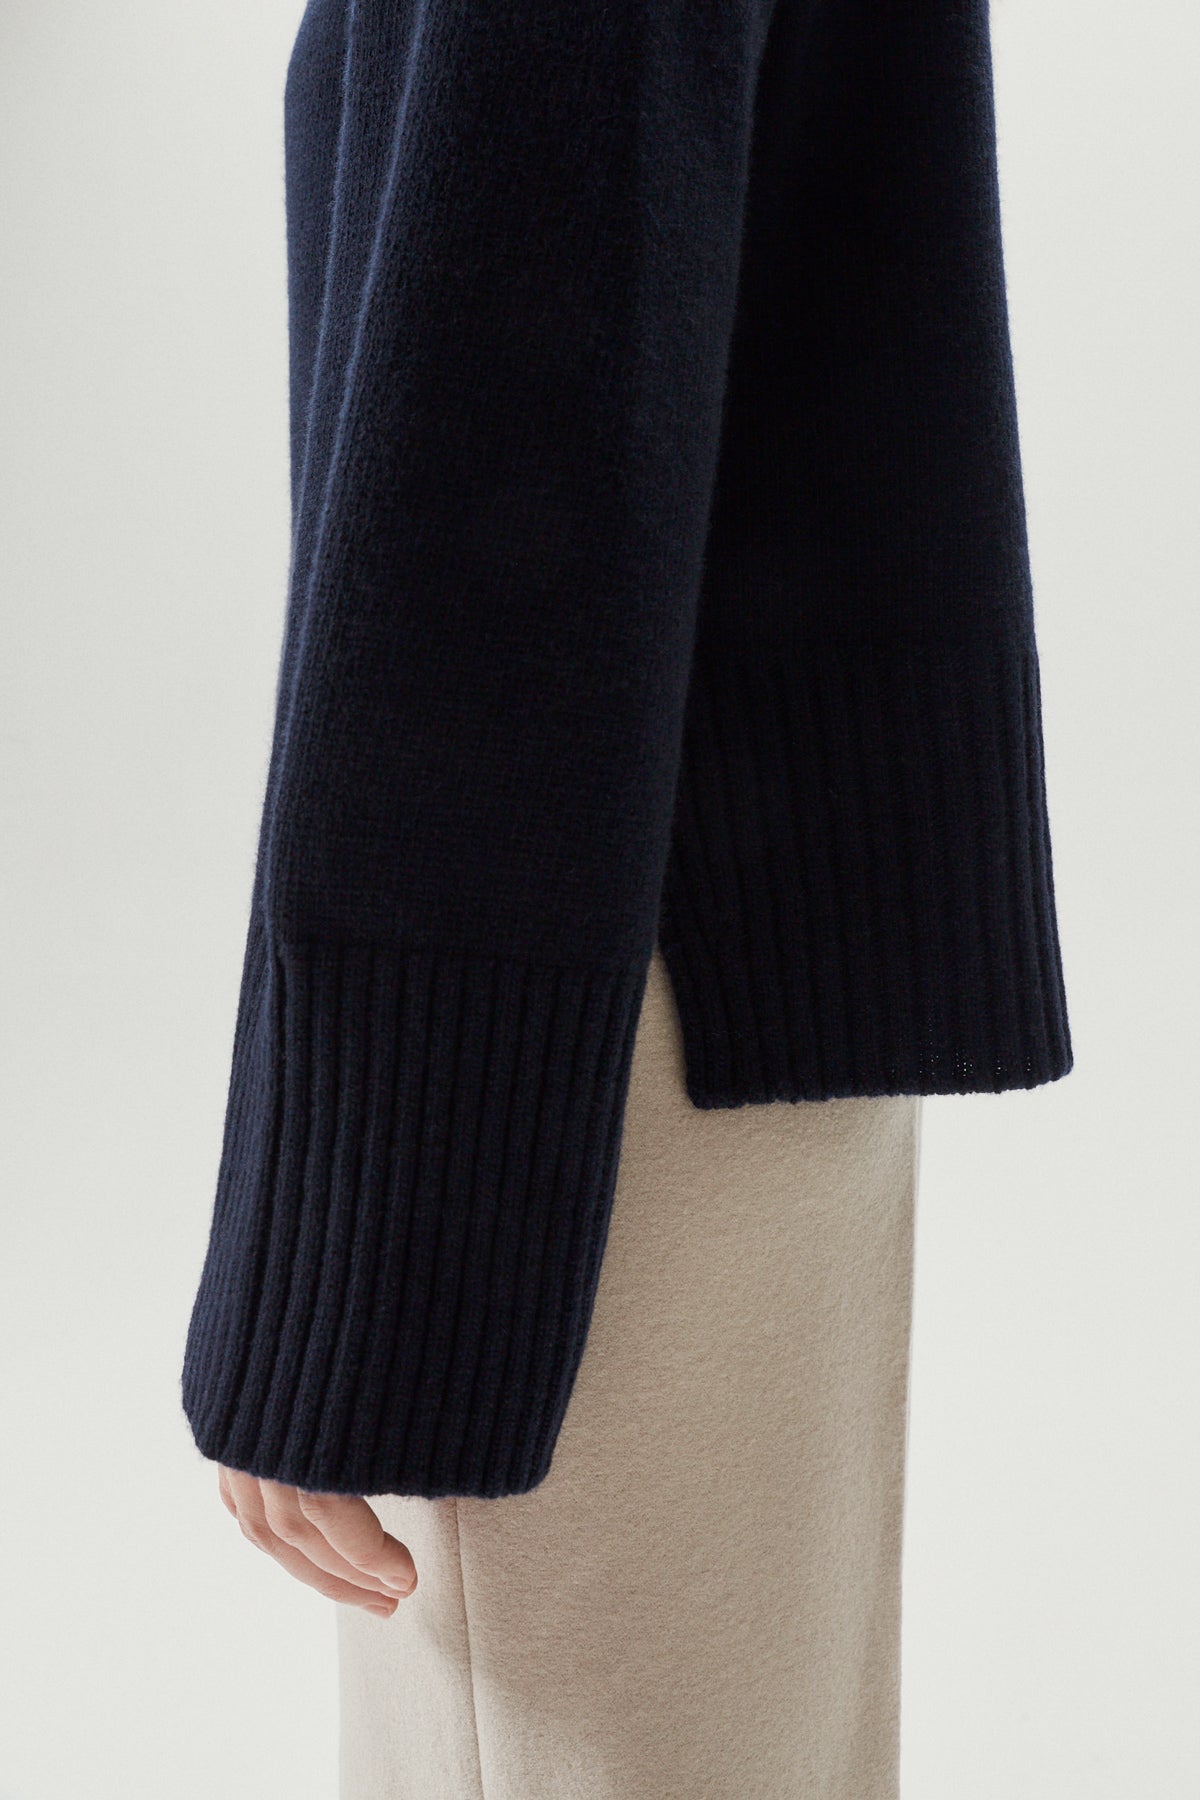 Blue Navy | The Woolen Relaxed Cardigan